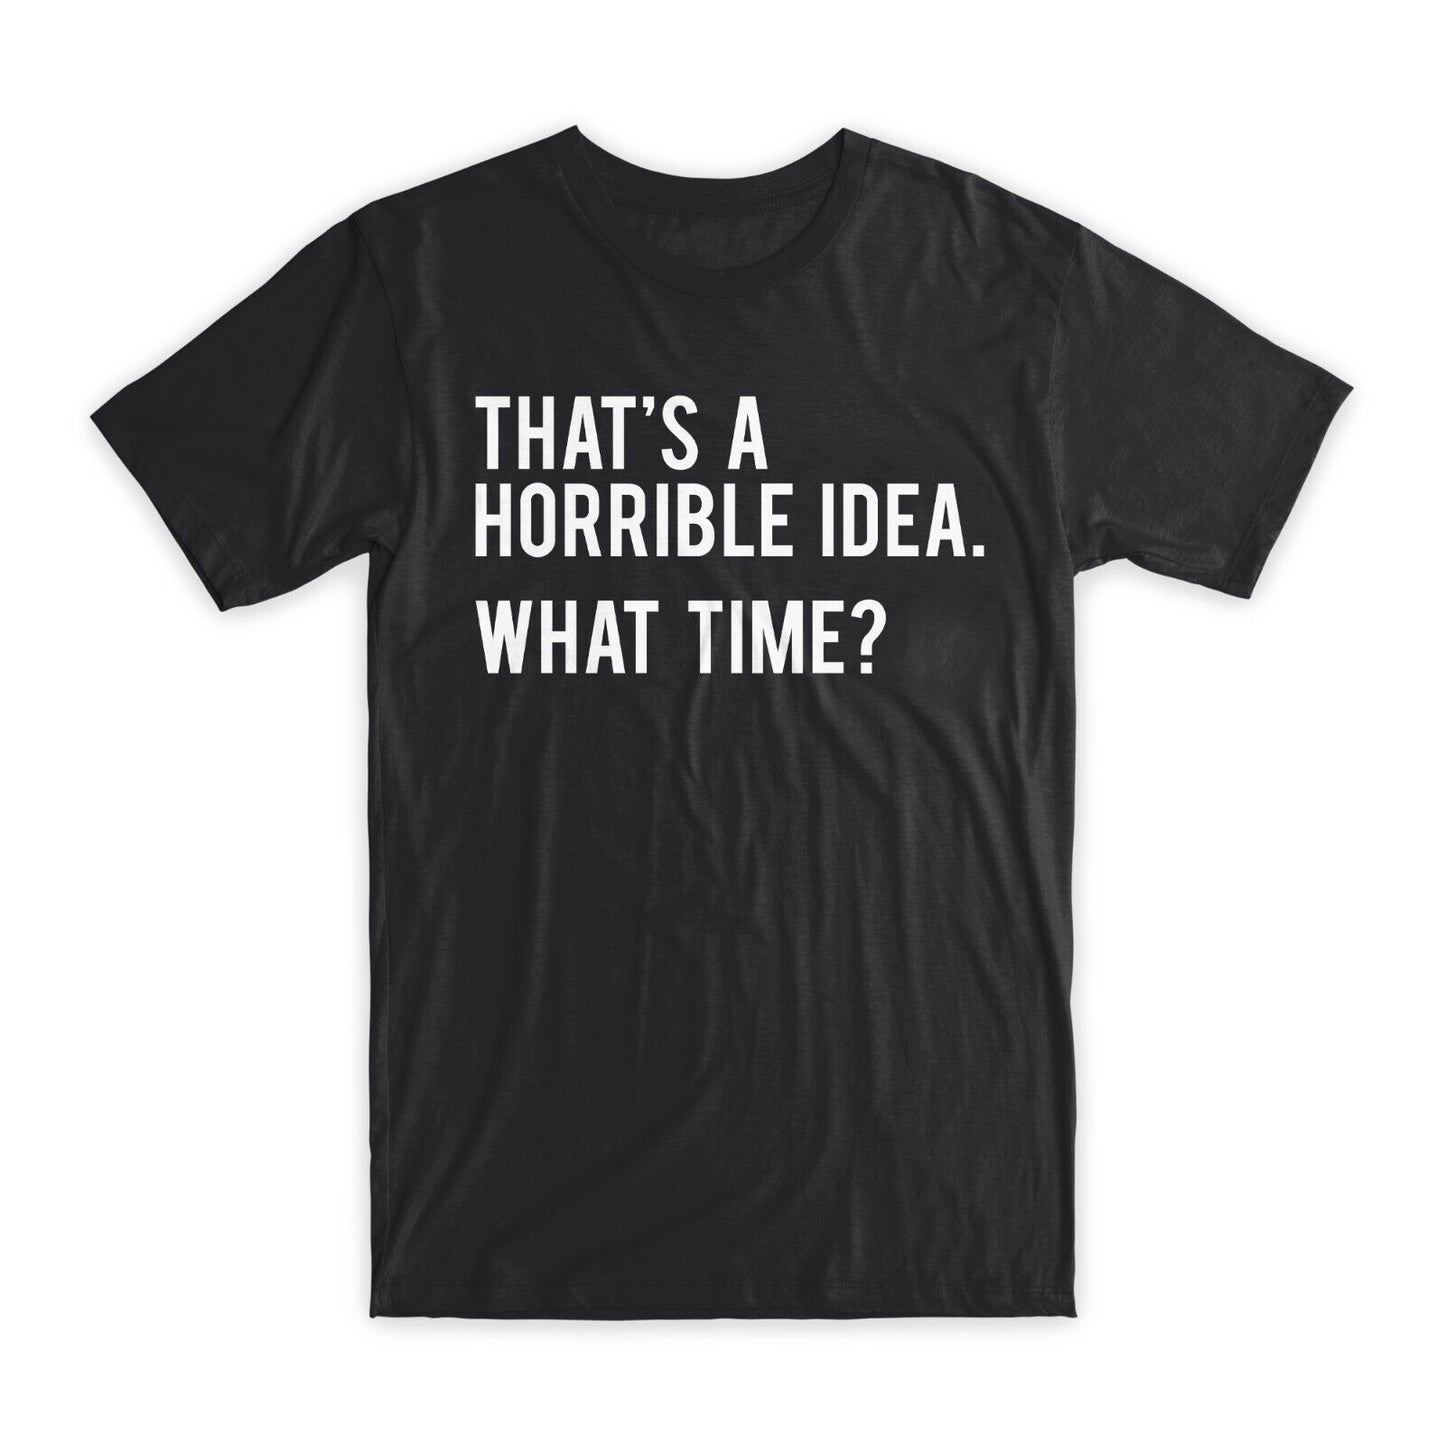 That's A Horrible Idea T-Shirt Premium Soft Cotton Crew Neck Funny Tee Gifts NEW